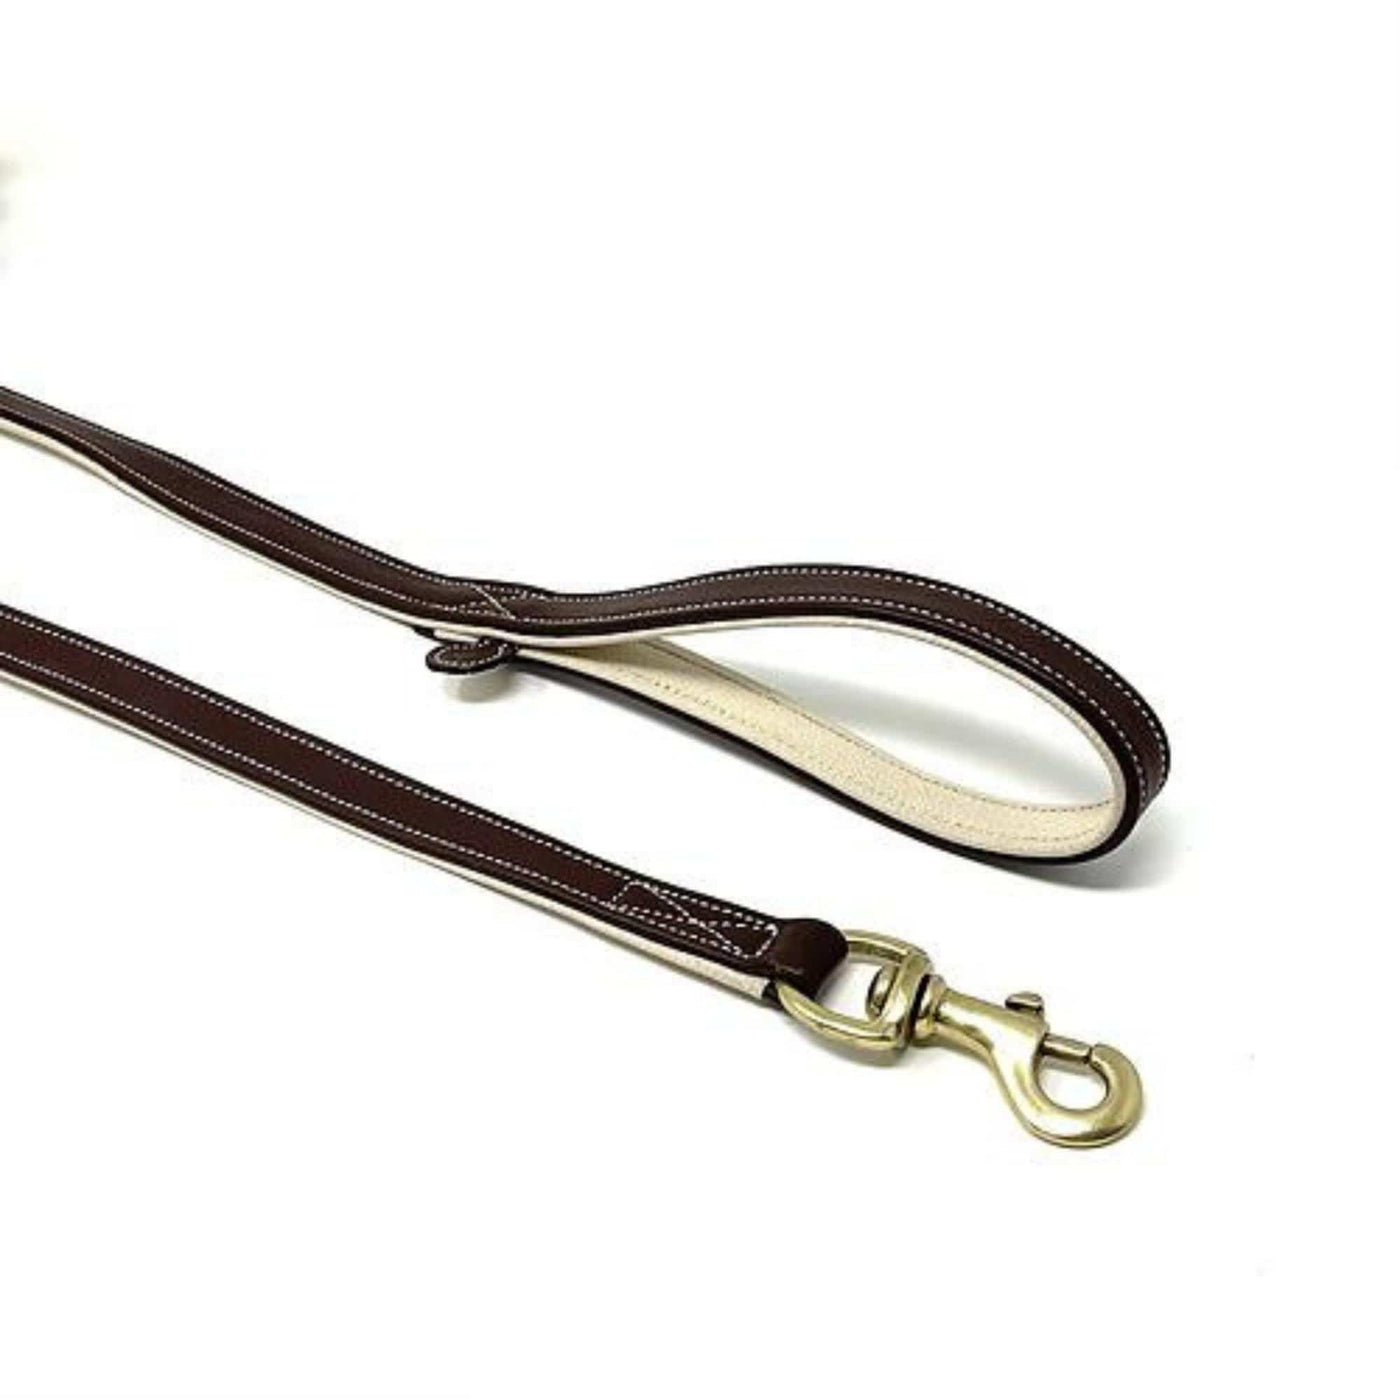 CLIFF Home Luxury Leather Dog Lead in Tan & Cream